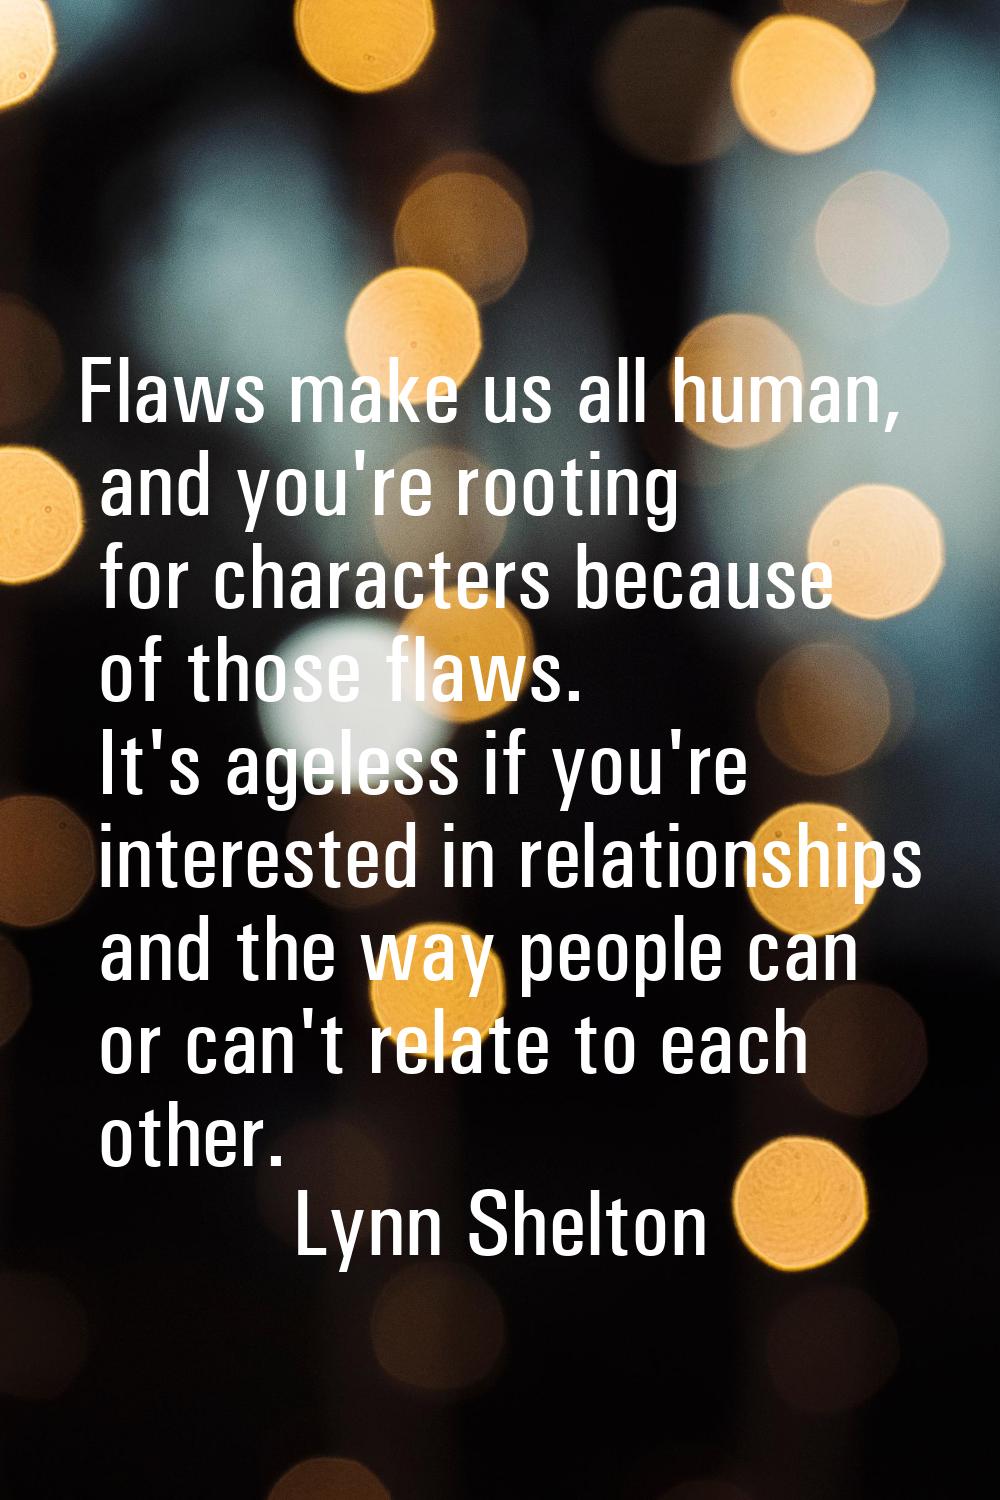 Flaws make us all human, and you're rooting for characters because of those flaws. It's ageless if 